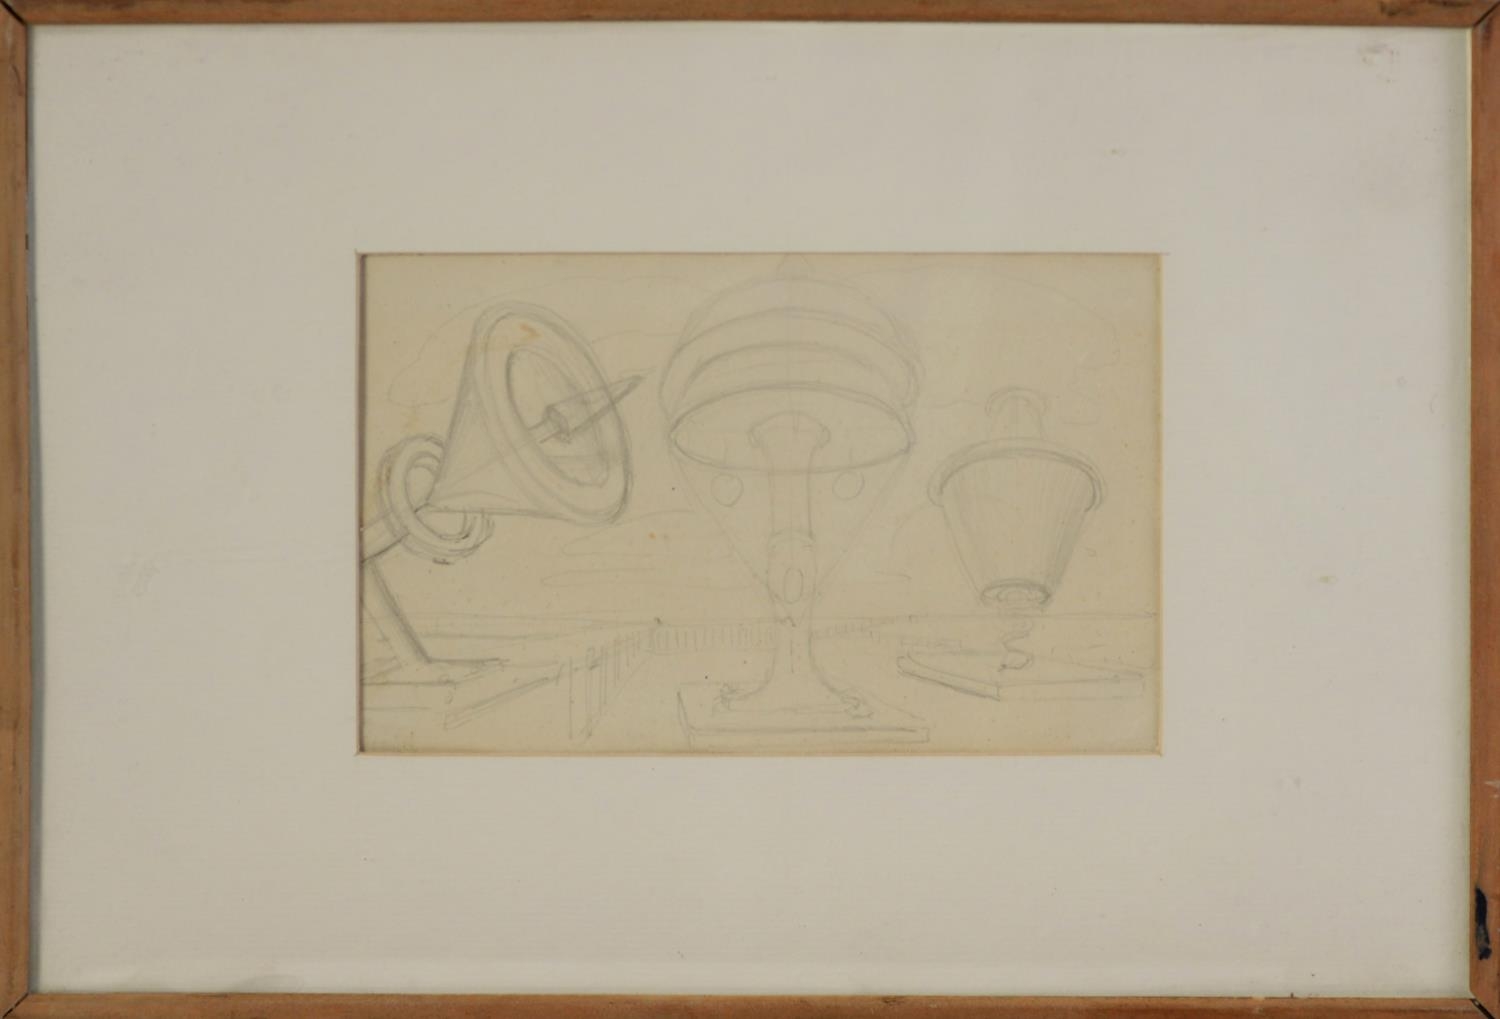 ATTRIBUTED TO EMMANUEL LEVY (1900-1986) PENCIL SKETCH Conical forms Ascribed in pencil verso and - Image 2 of 2